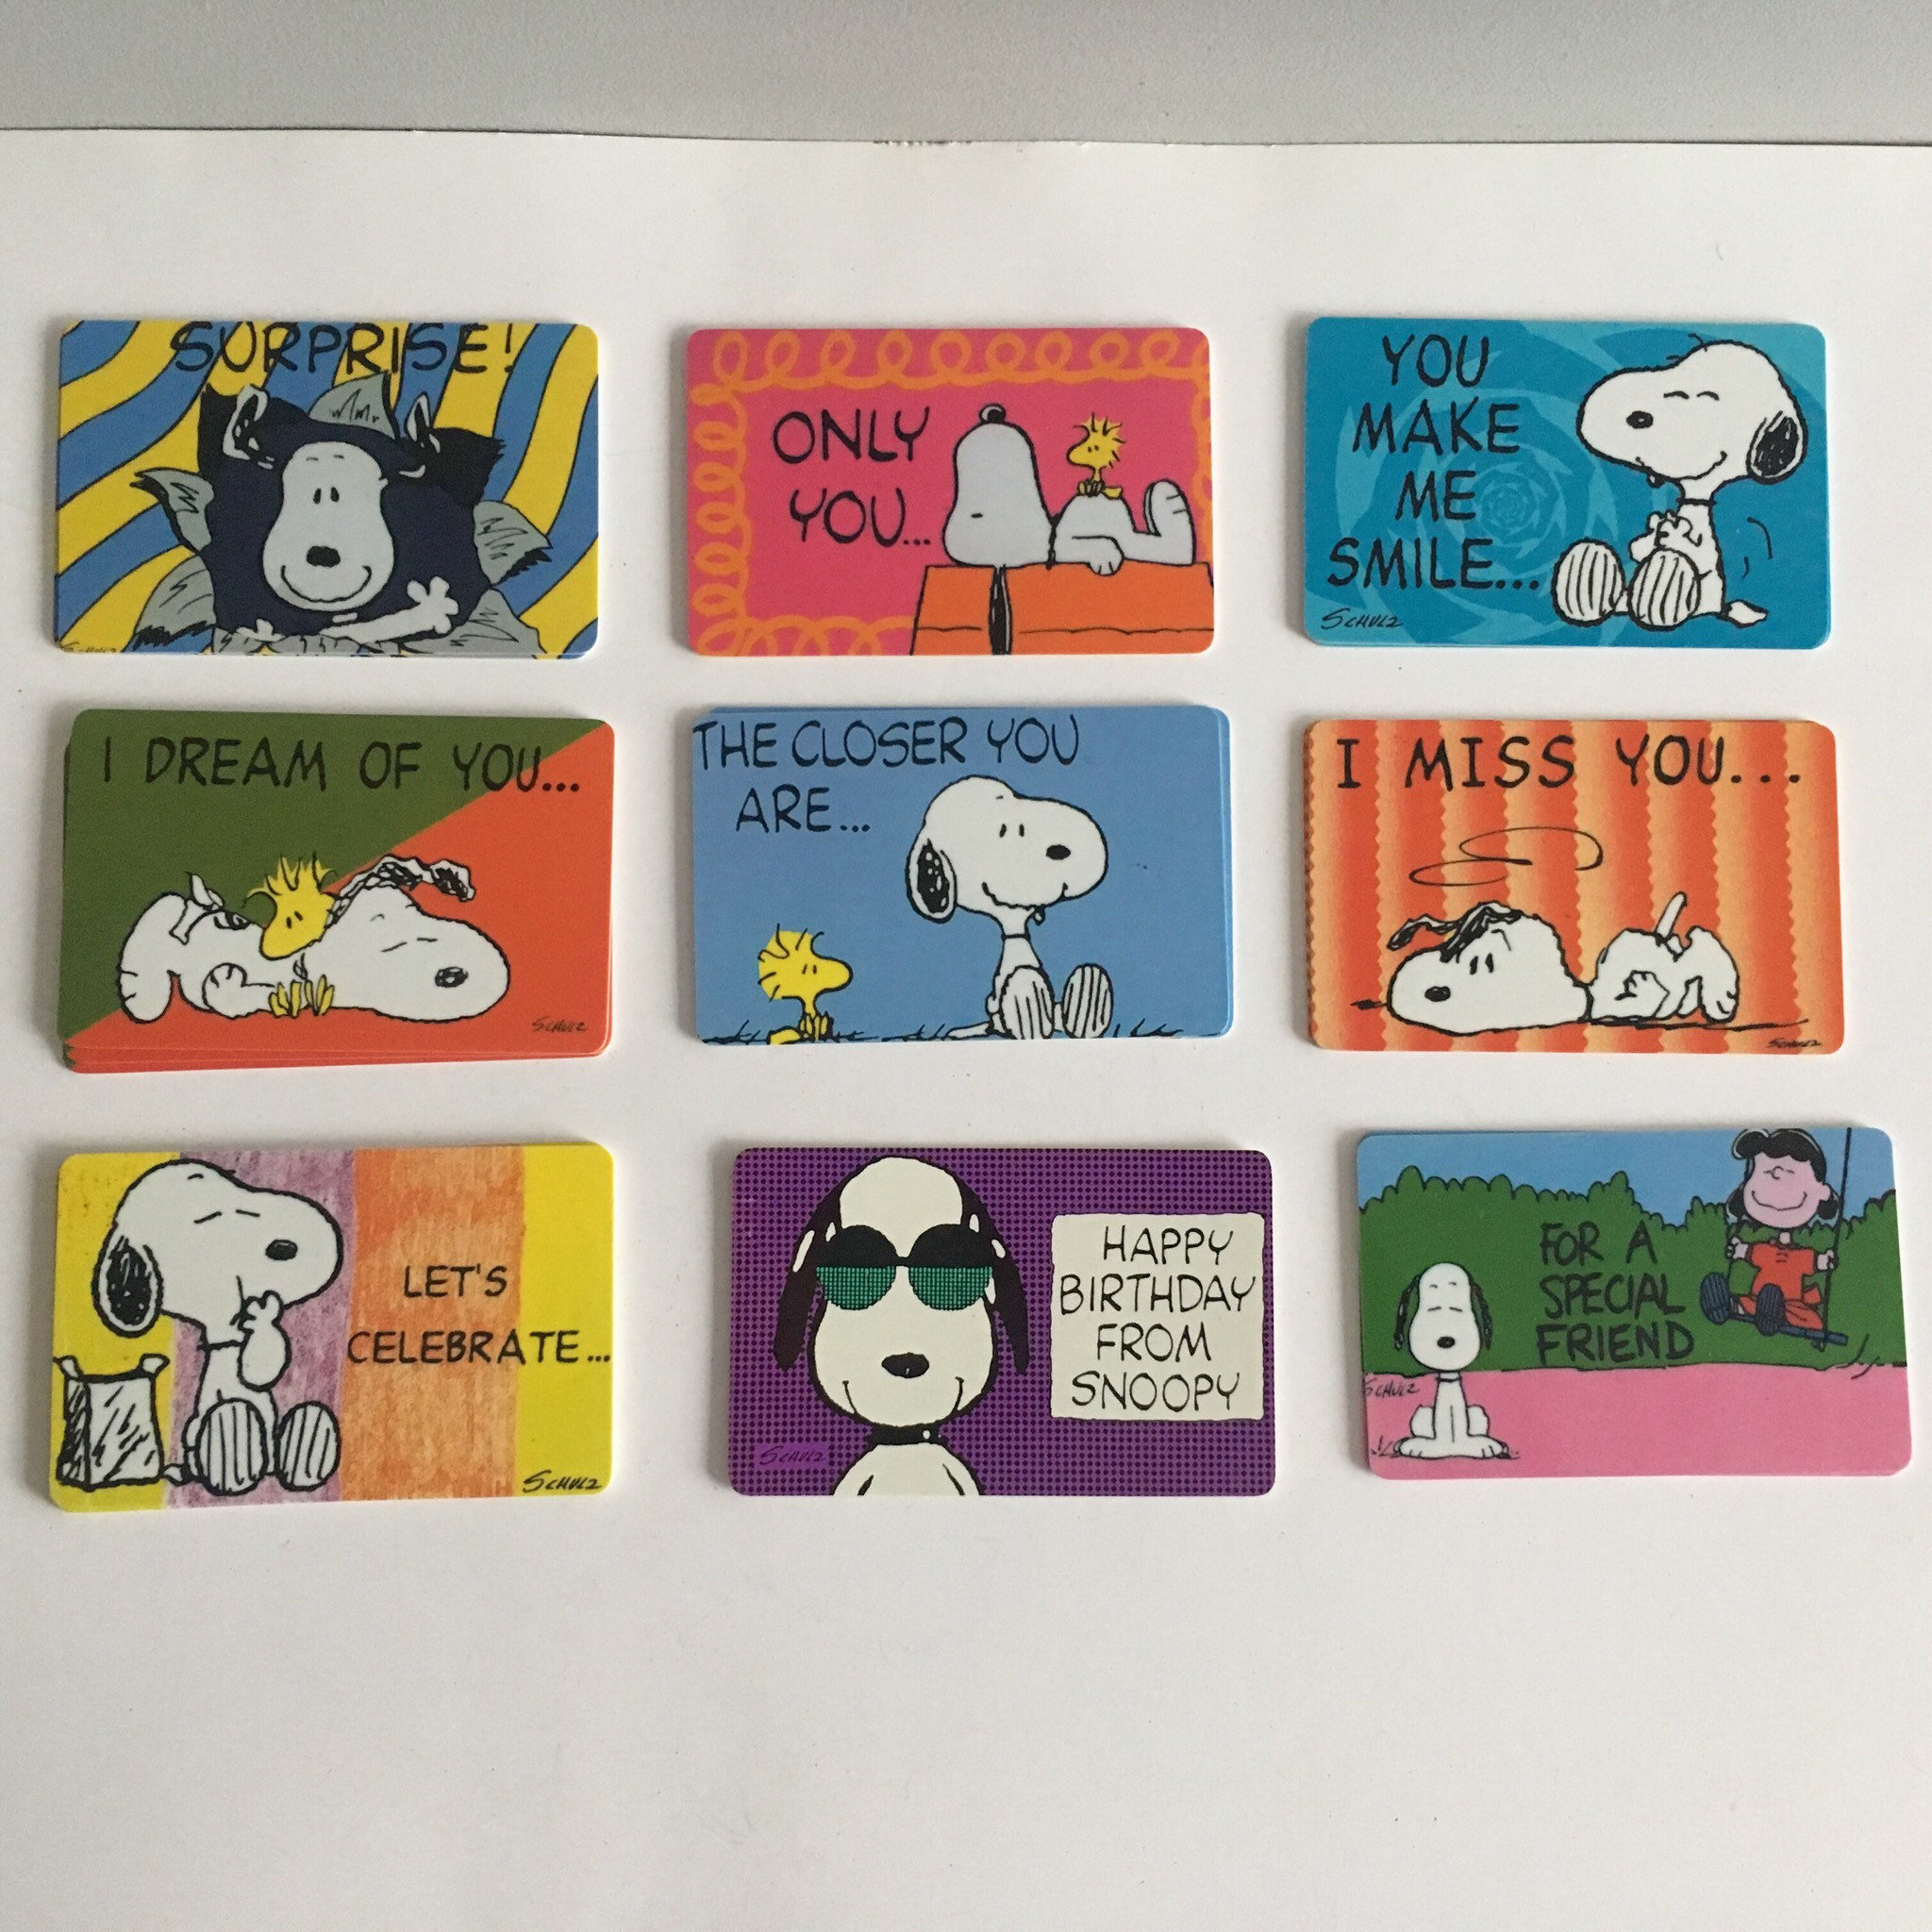 Vintage Snoopy greeting cards plastic credit card style. | Etsy